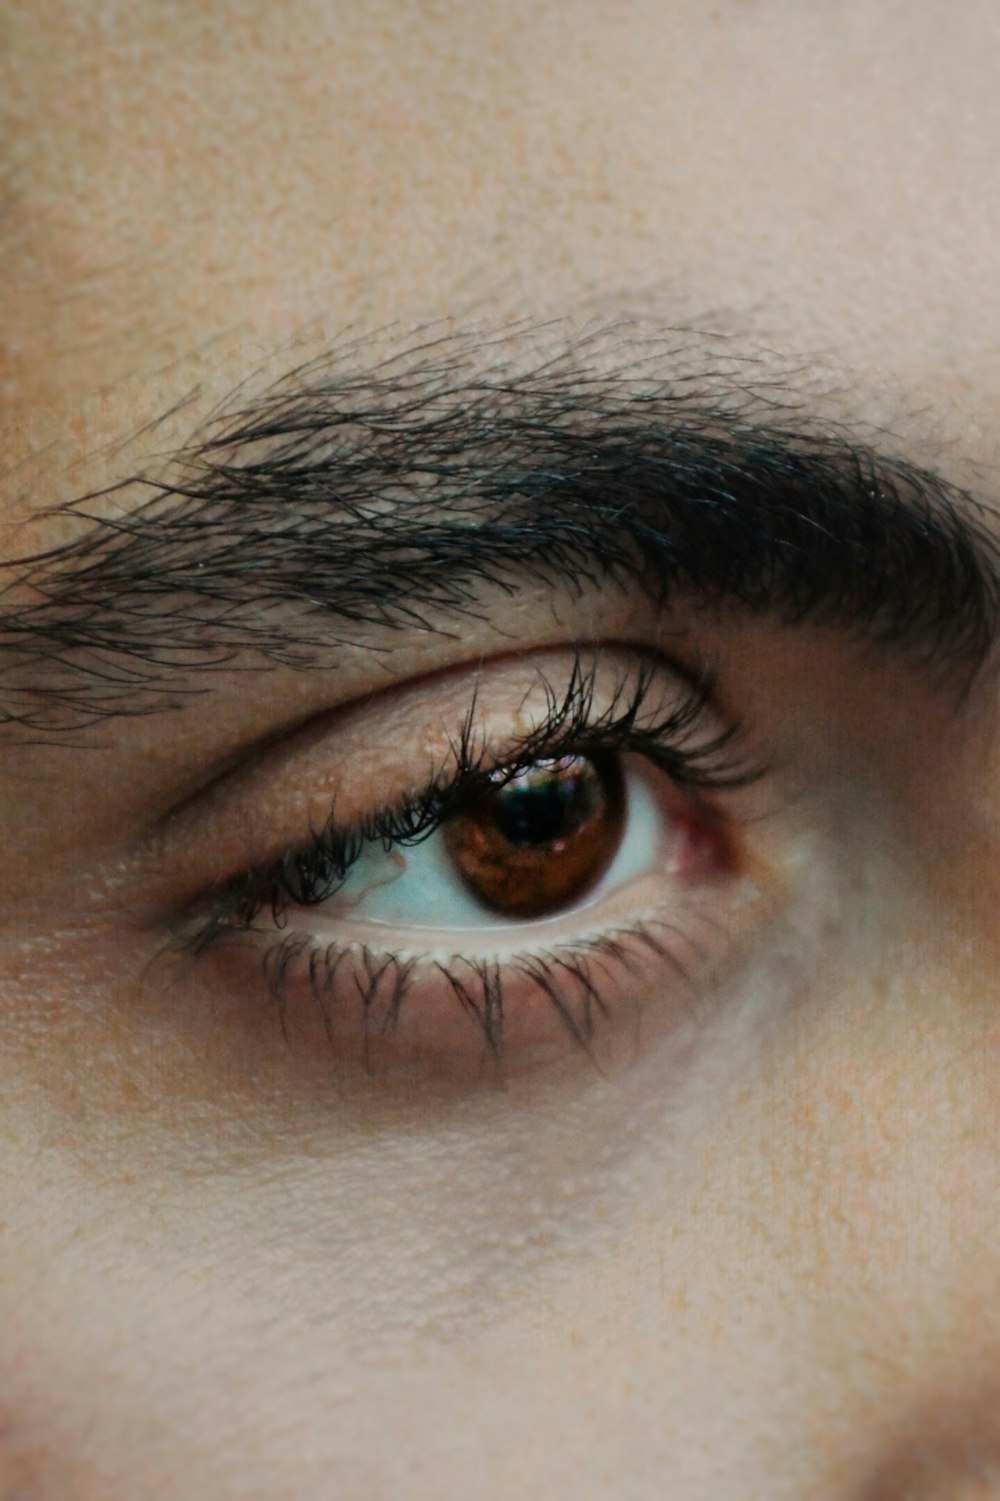 a close up of a person's eye with long lashes